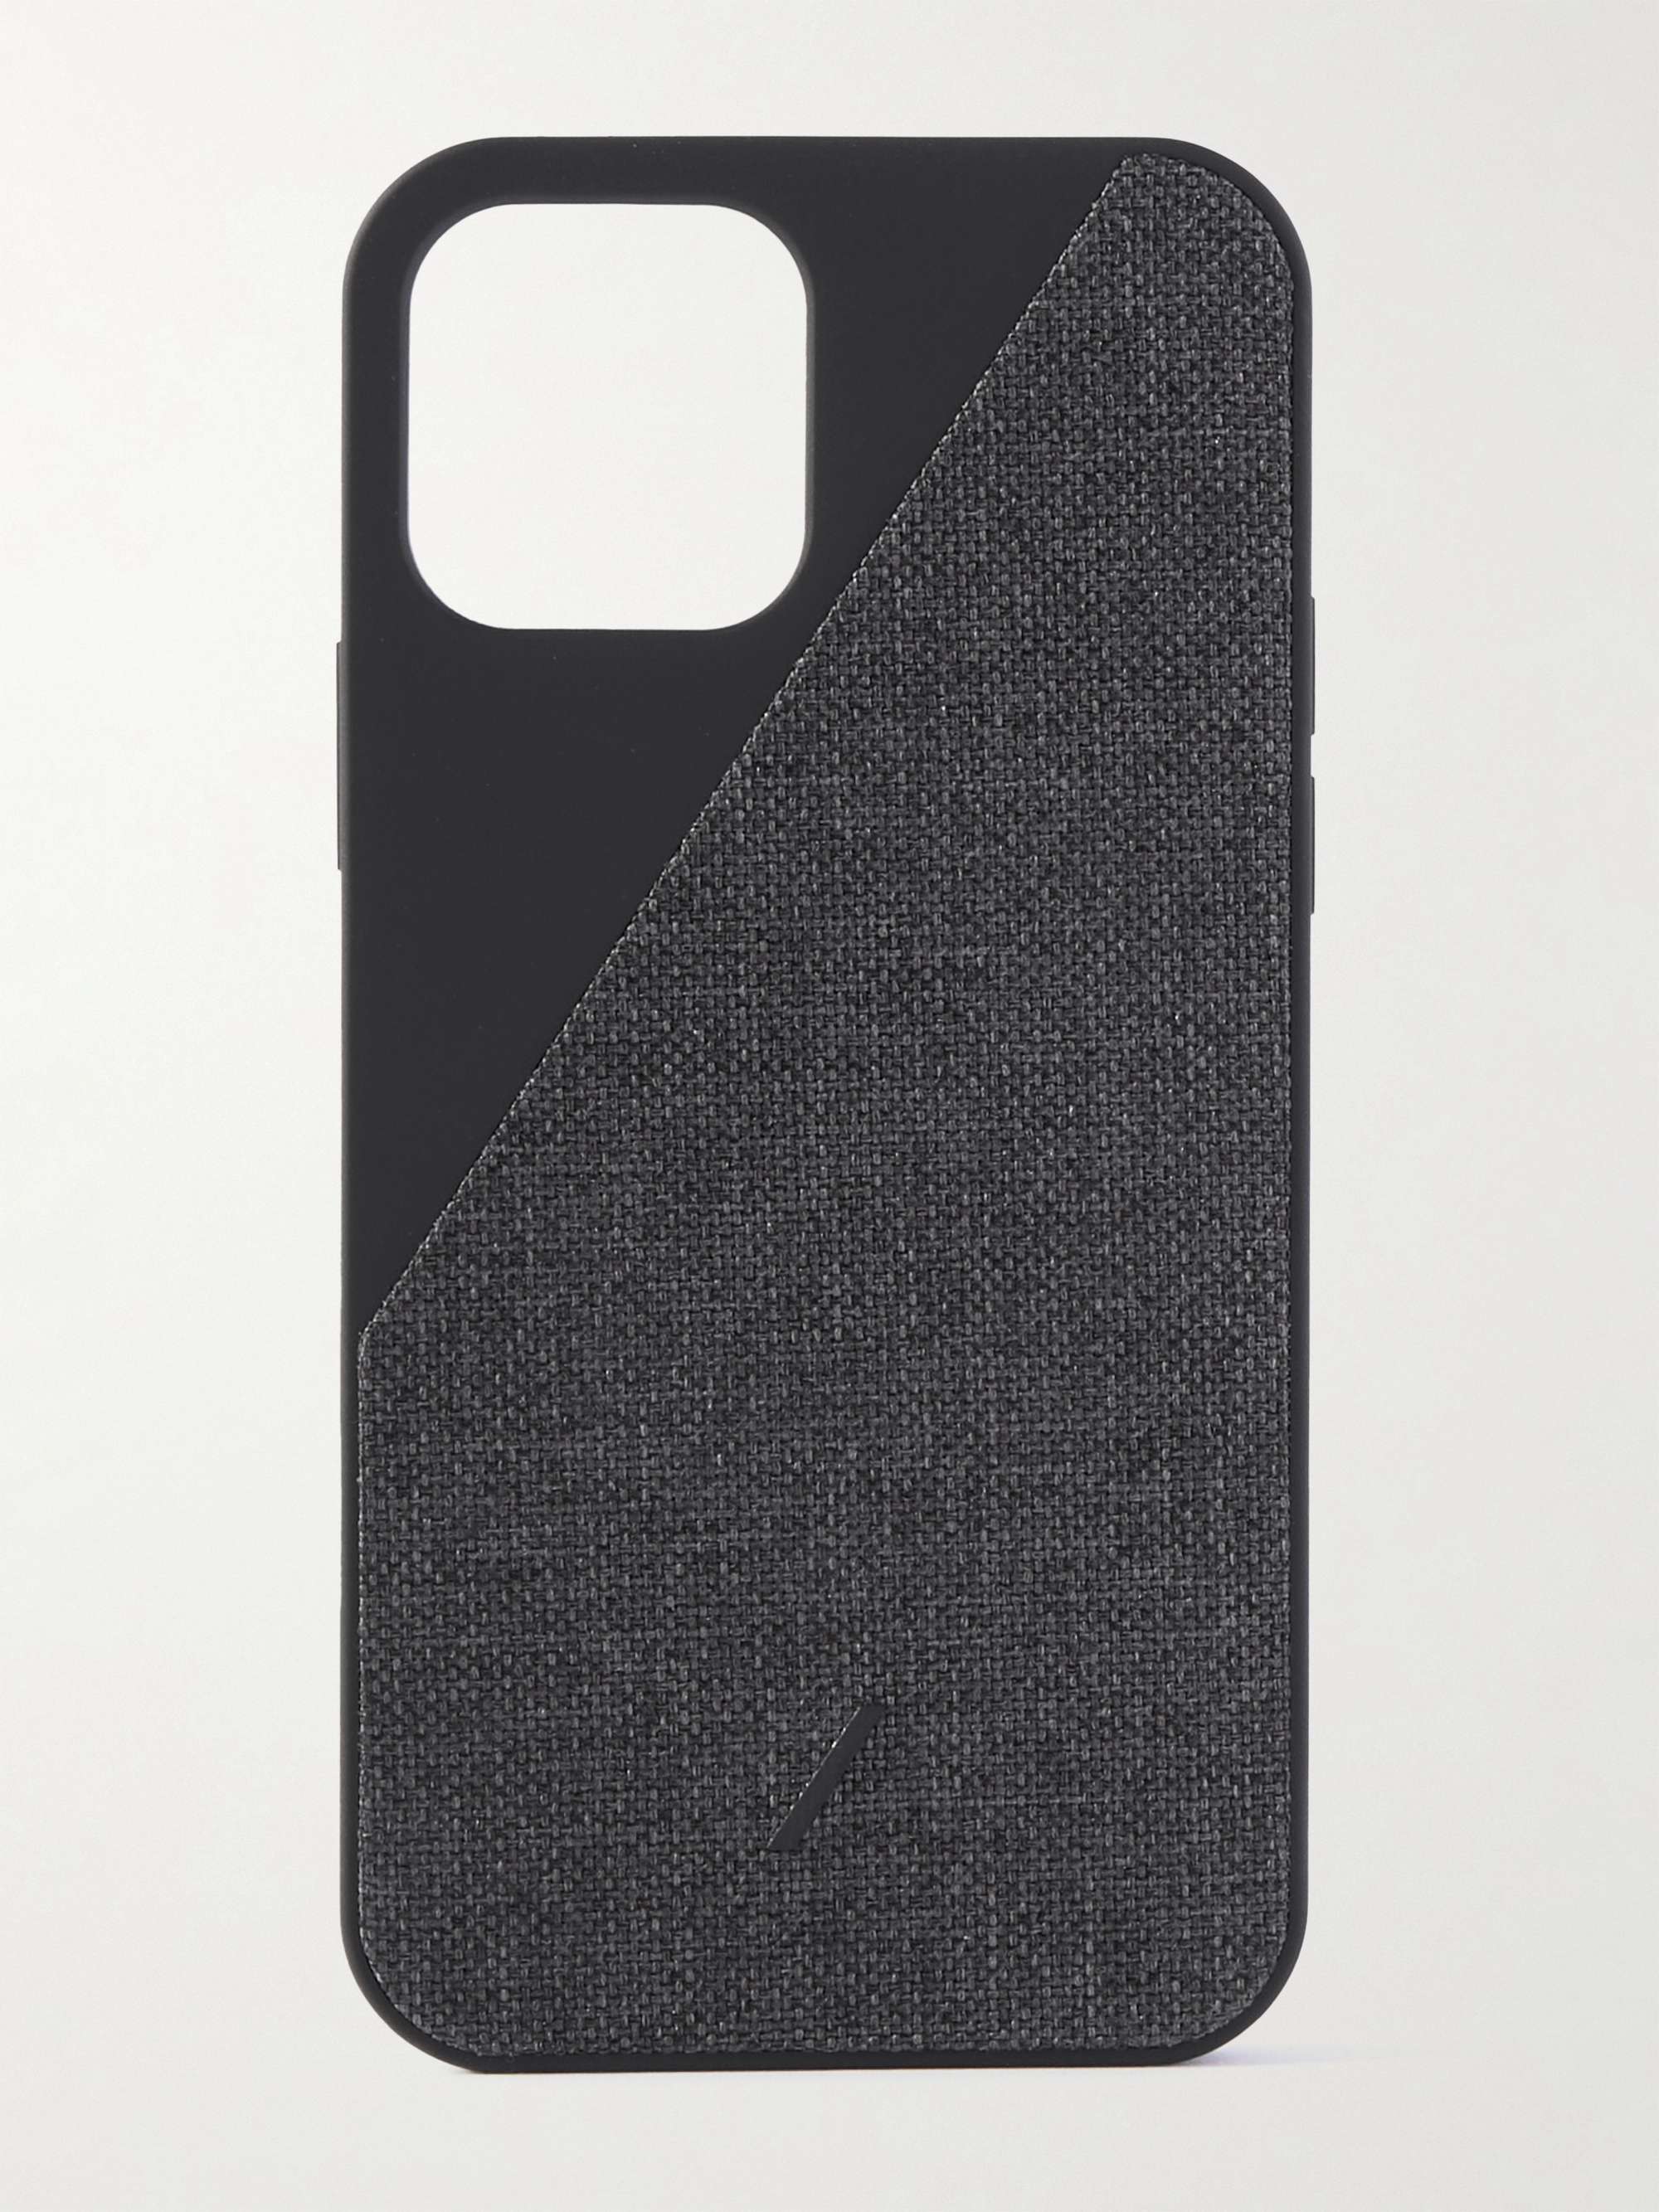 NATIVE UNION Clic Canvas and Rubber MagSafe iPhone 12 Case for Men | MR  PORTER